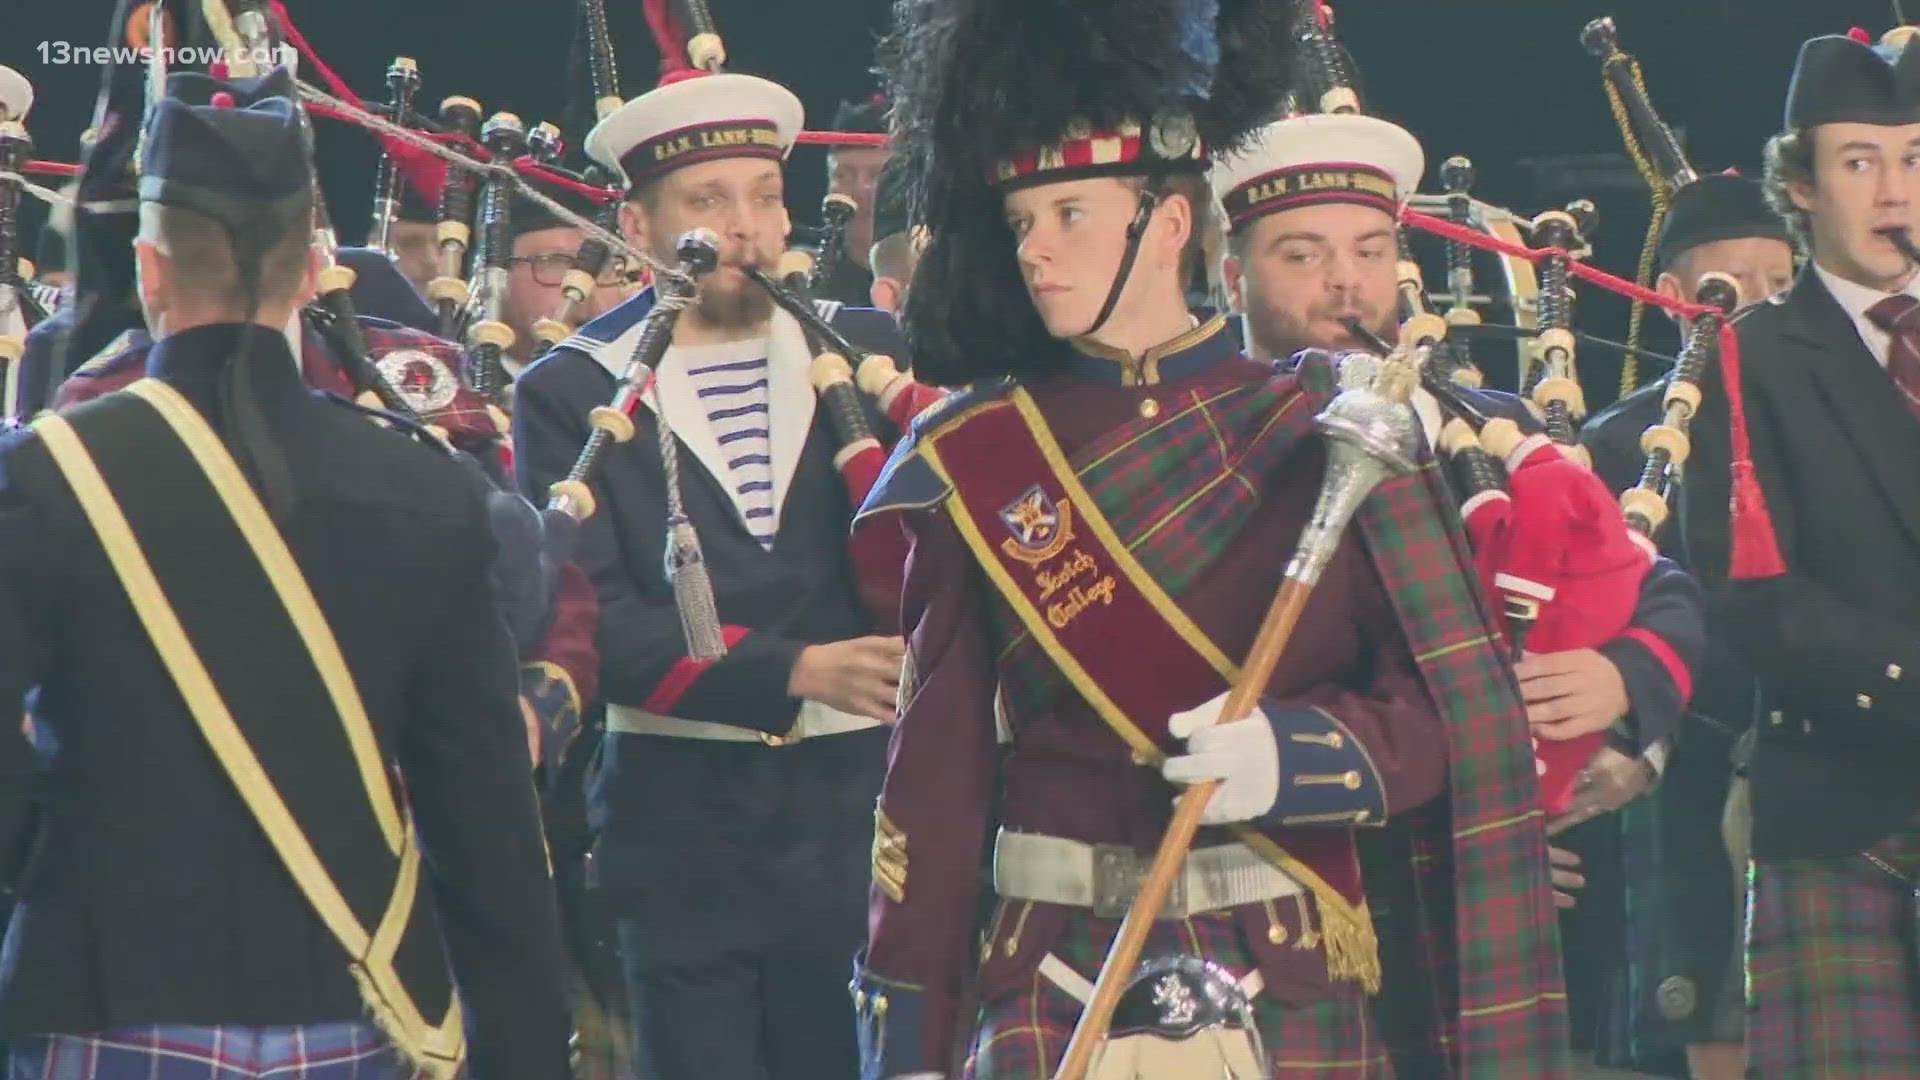 The annual event is an exhibition of military bands, massed pipes and drums, military drill teams, Celtic dancers, and choirs, presented in cooperation with NATO.